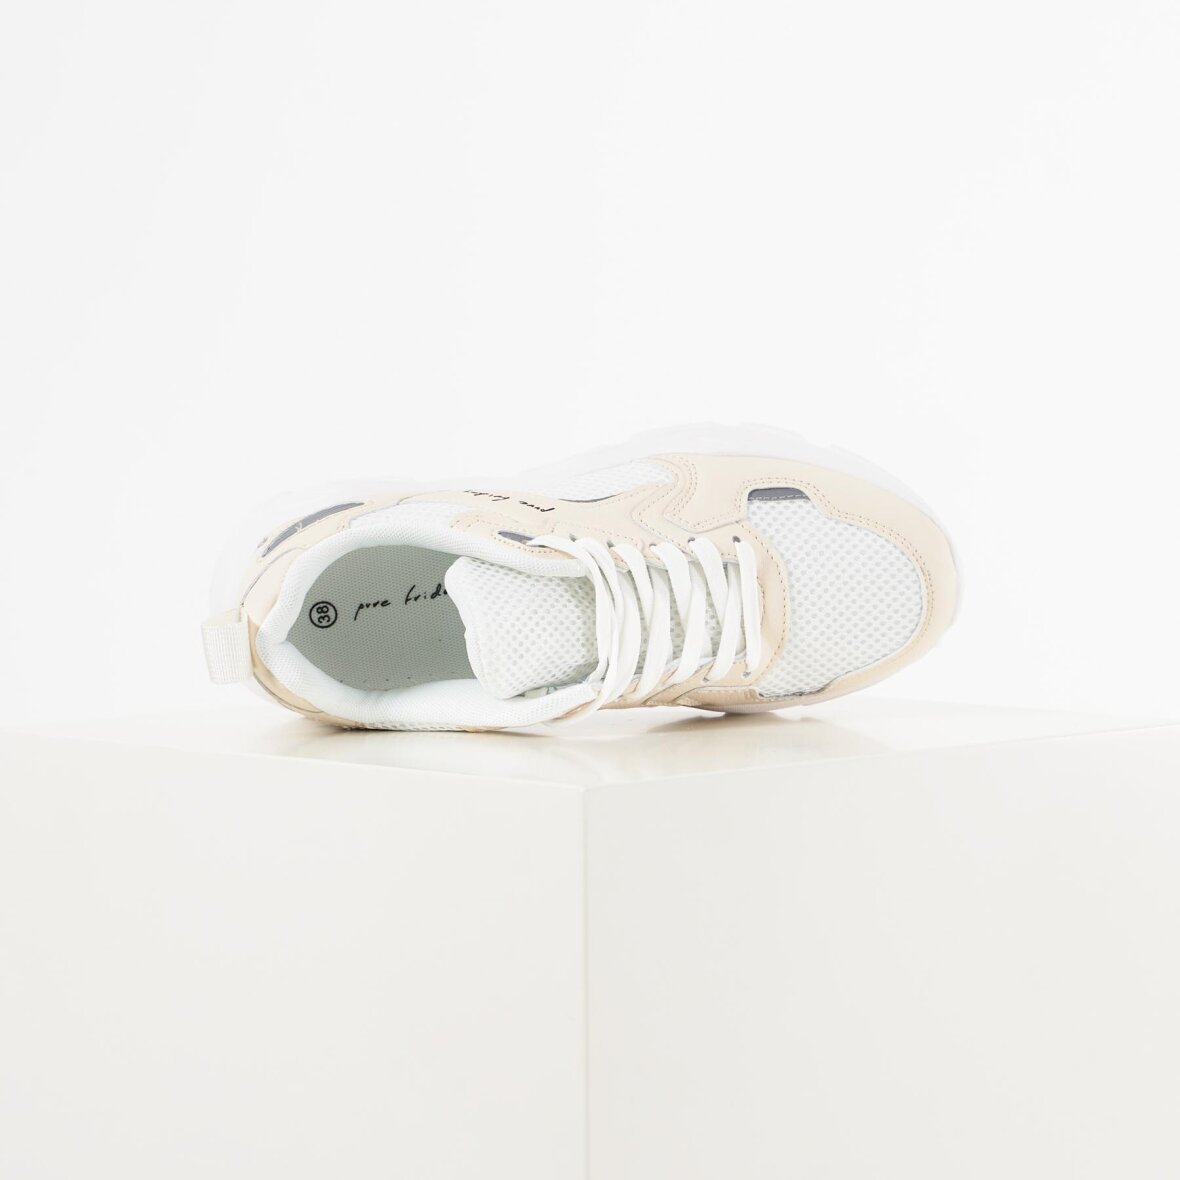 Pure friday - Purfrida sneakers